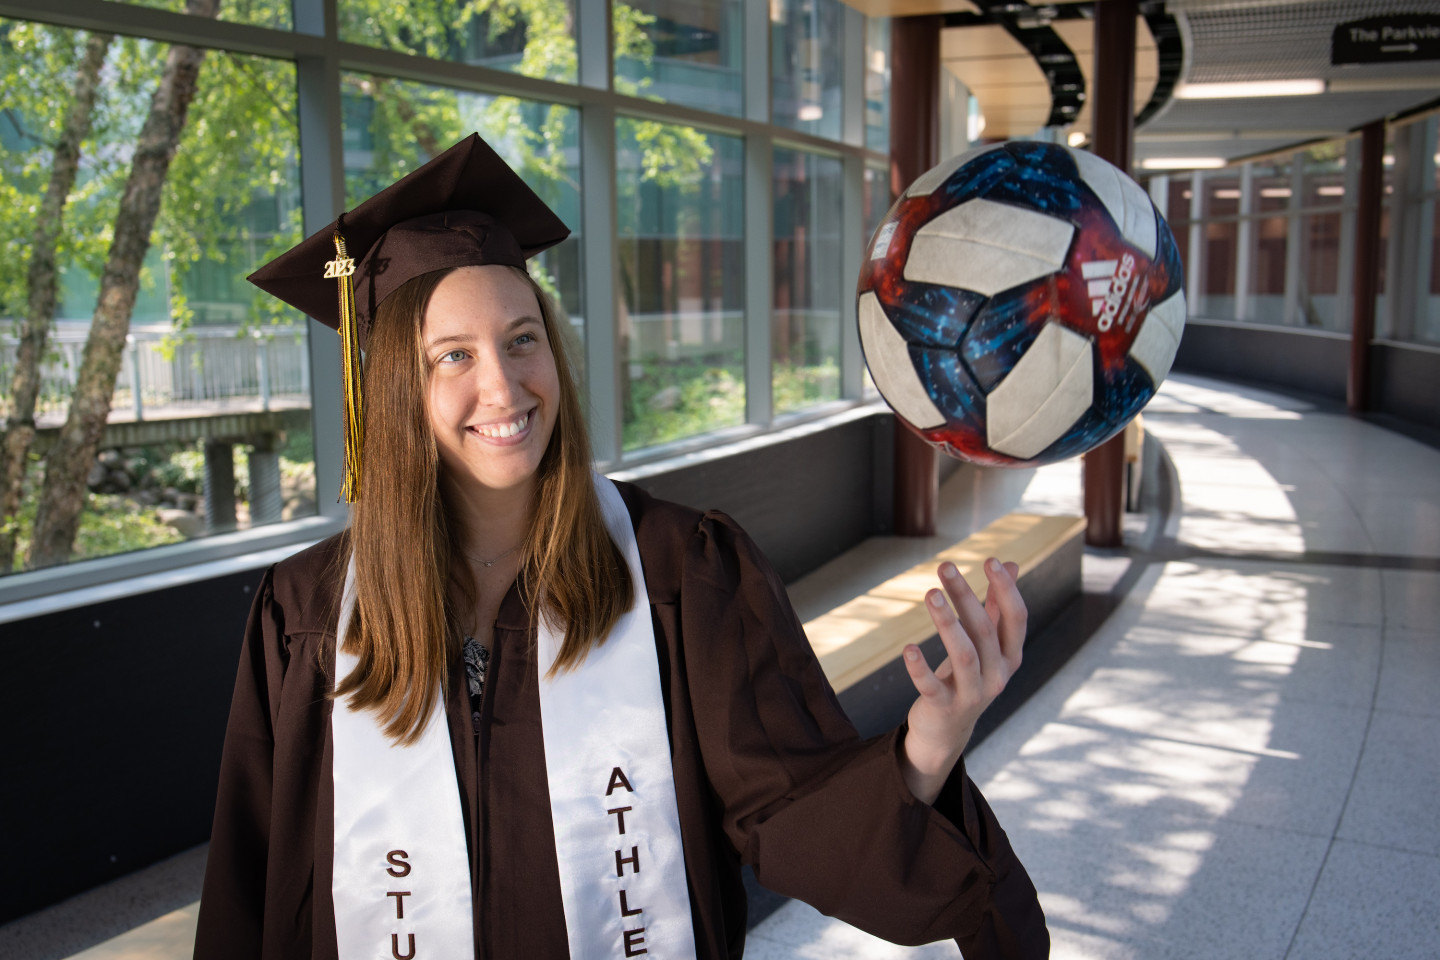 Hannah Sargent tosses a soccer ball in the air while wearing her graduation cap and gown.